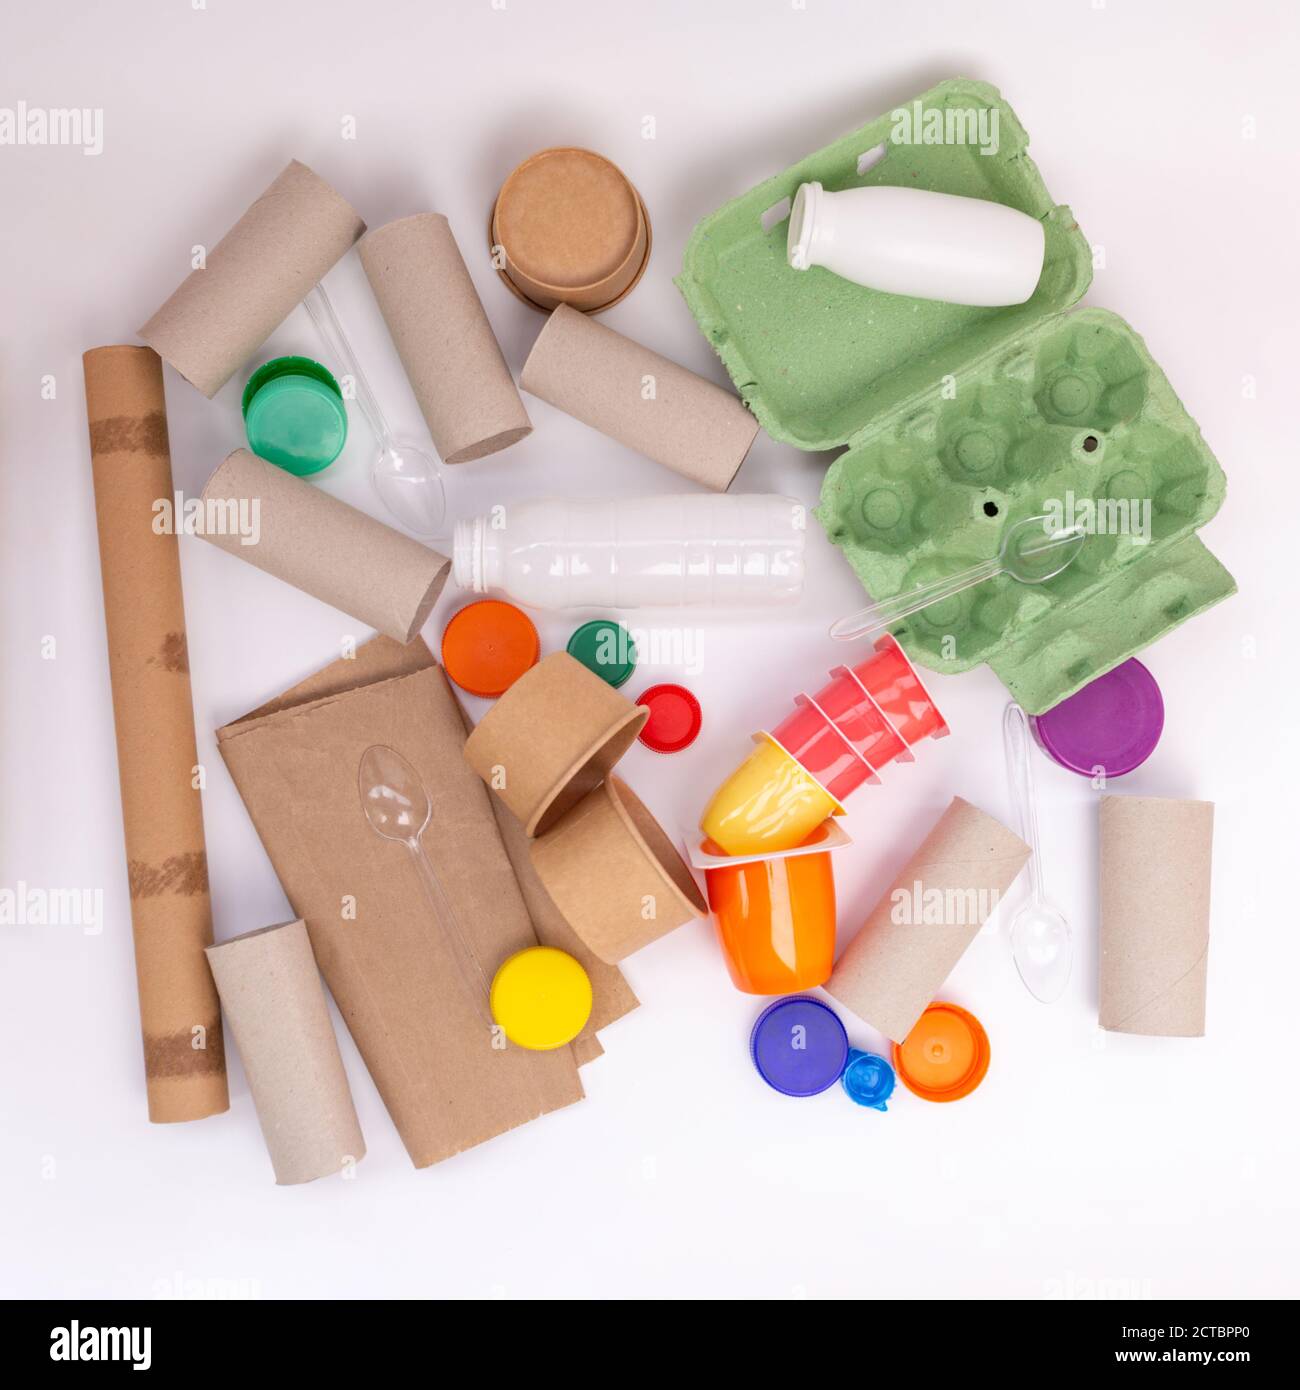 recycled craft ideas for kids, use of toilet paper rolls and other materials for creative projects, flat lay, white background, top view Stock Photo